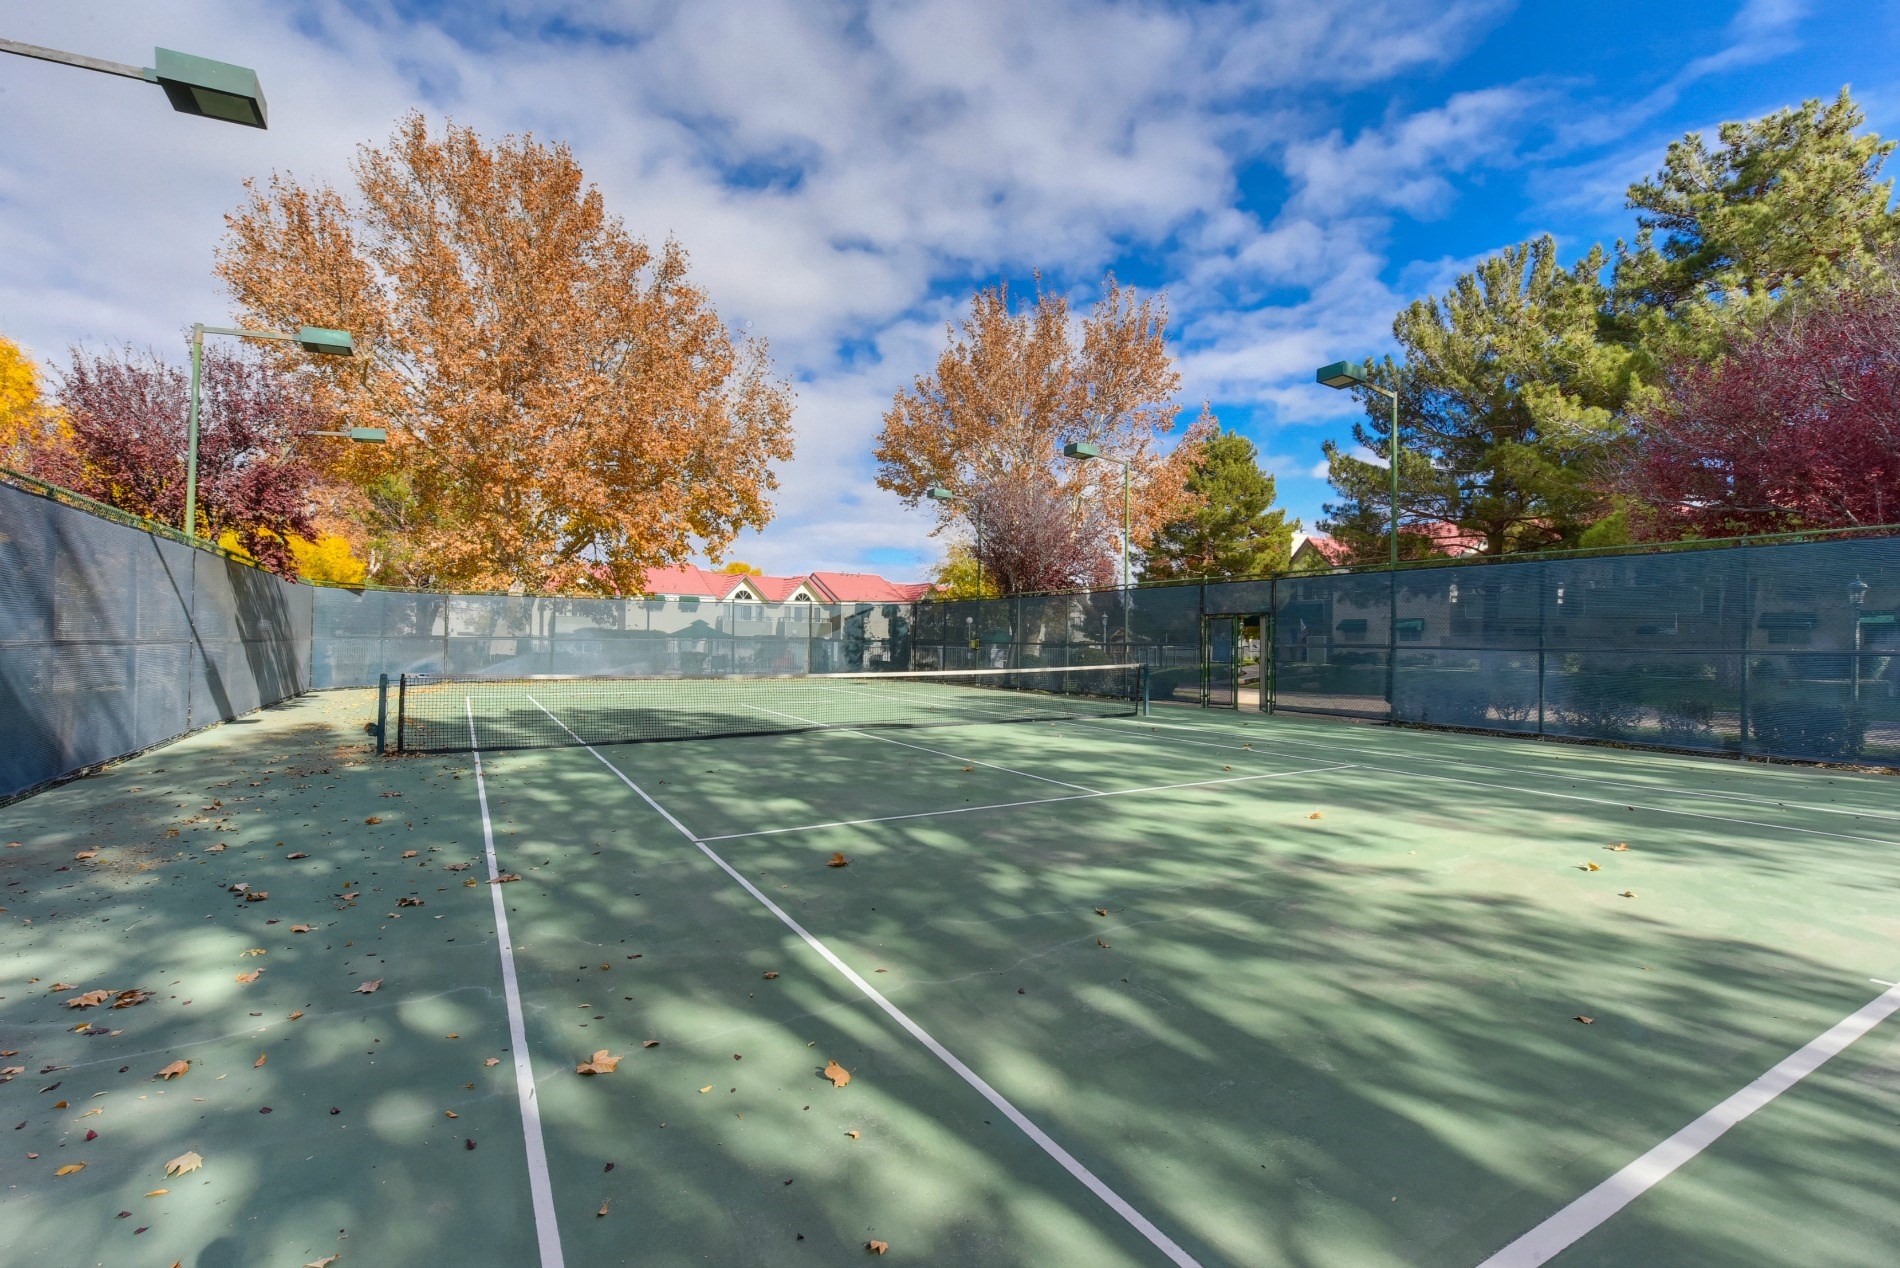 Tennis Court with Net, Autumn Leaves On Ground and Large Trees